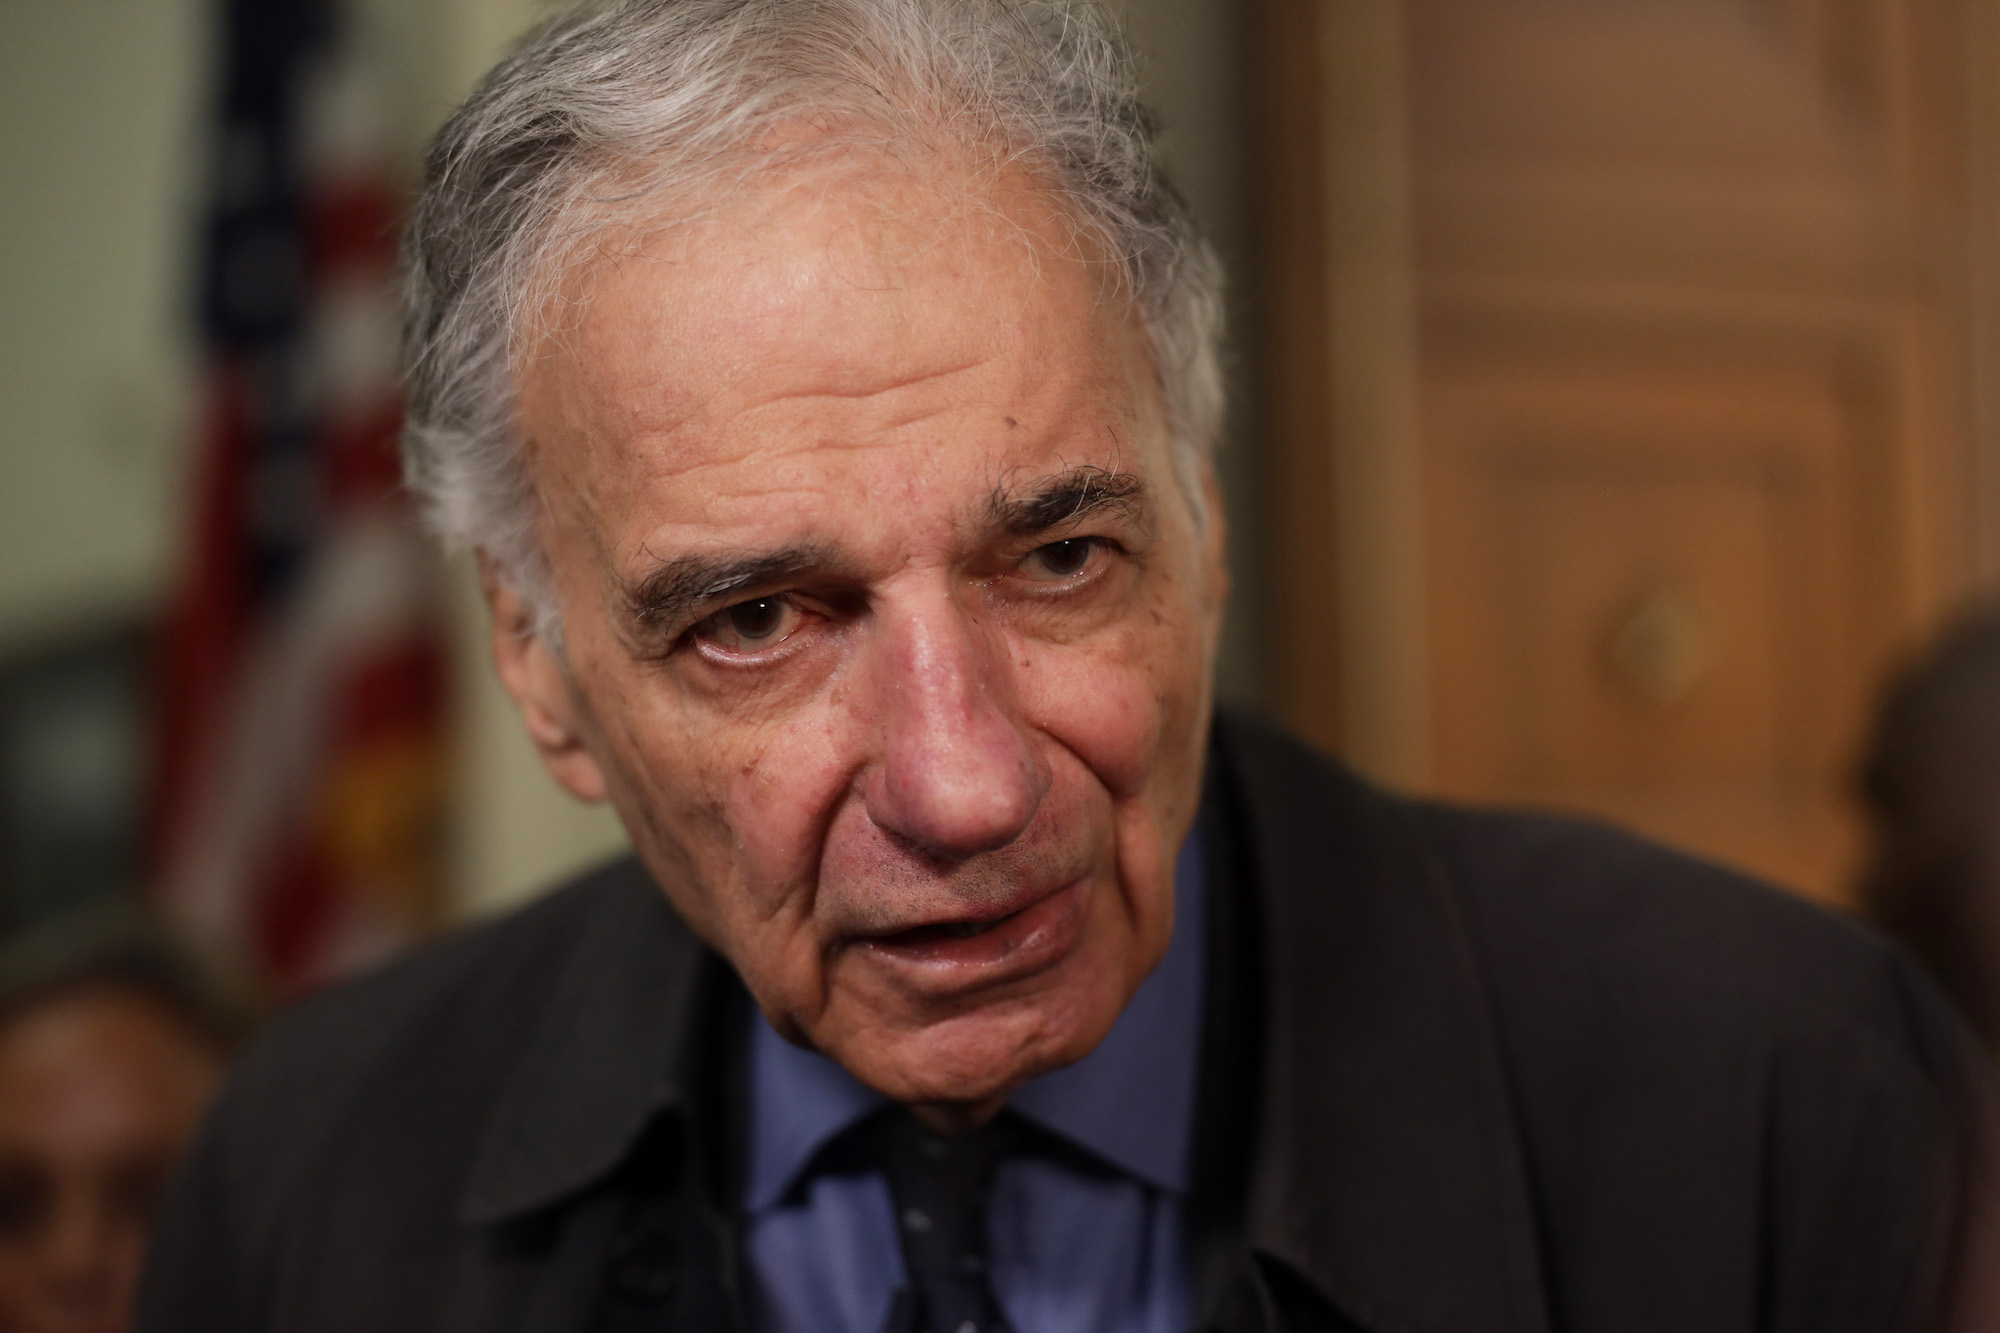 Consumer advocate Ralph Nader speaks to members of the media outside a House Transportation and Infrastructure Committee hearing on October 30, 2019, on Capitol Hill in Washington, D.C.